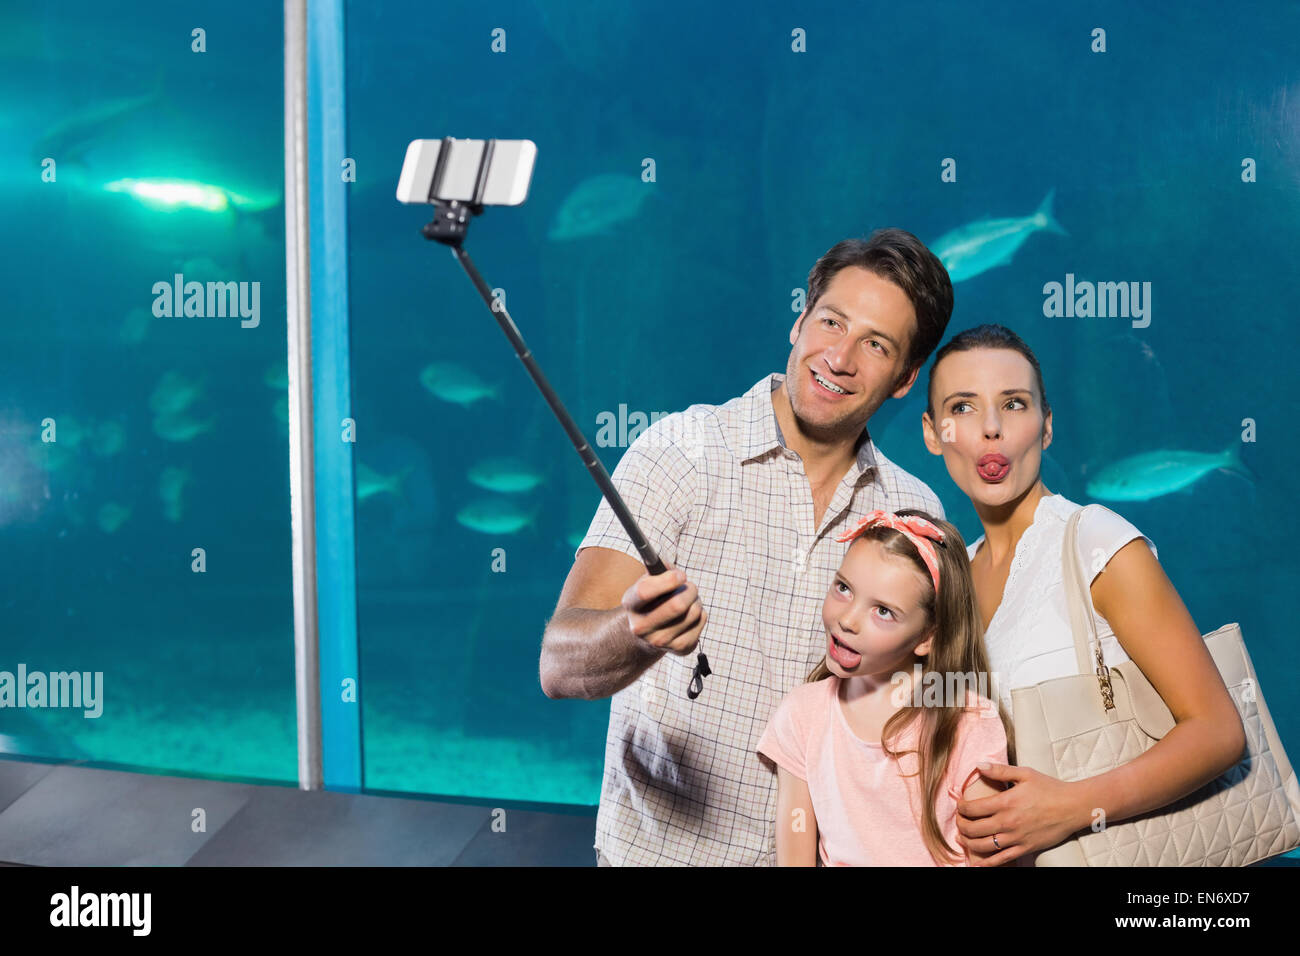 Happy Family using stick selfies Banque D'Images